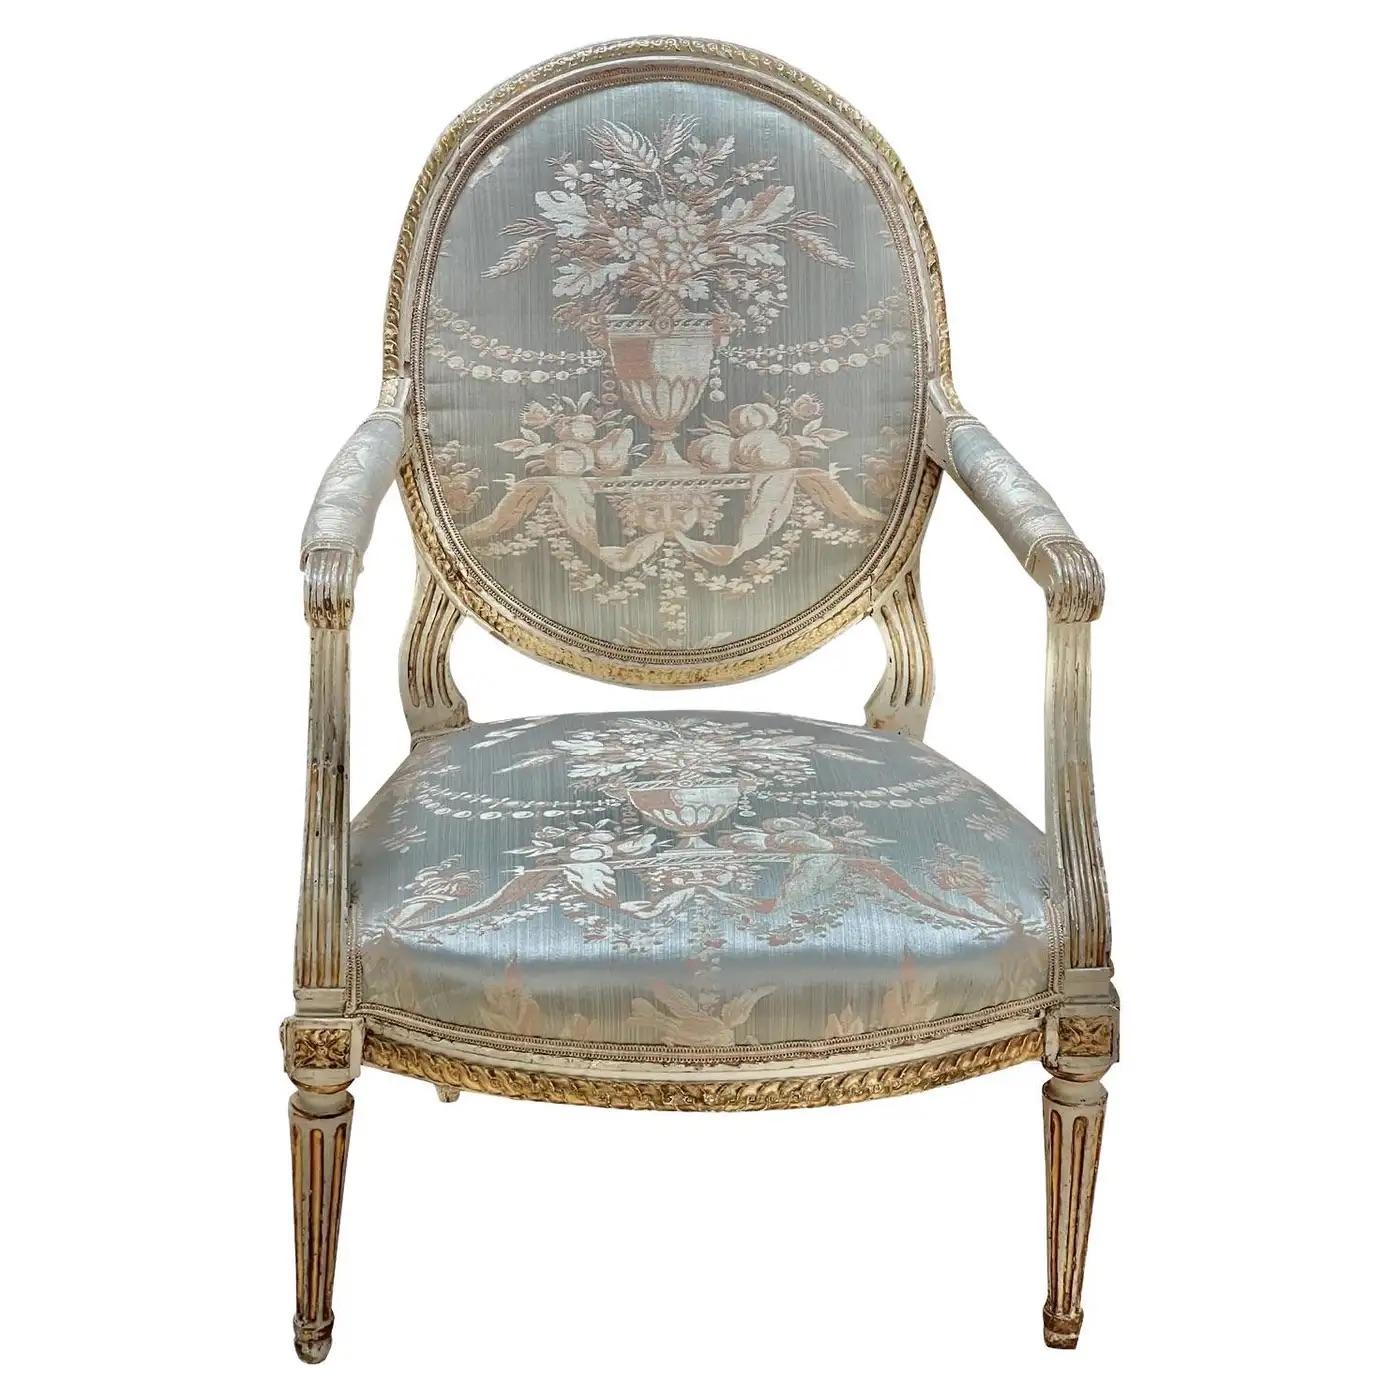 Antique Louis XV Style Giltwood Carved Open Armchairs For Sale at 1stDibs  louis  xvi chairs for sale, louis xv chair antique, louis xv furniture for sale